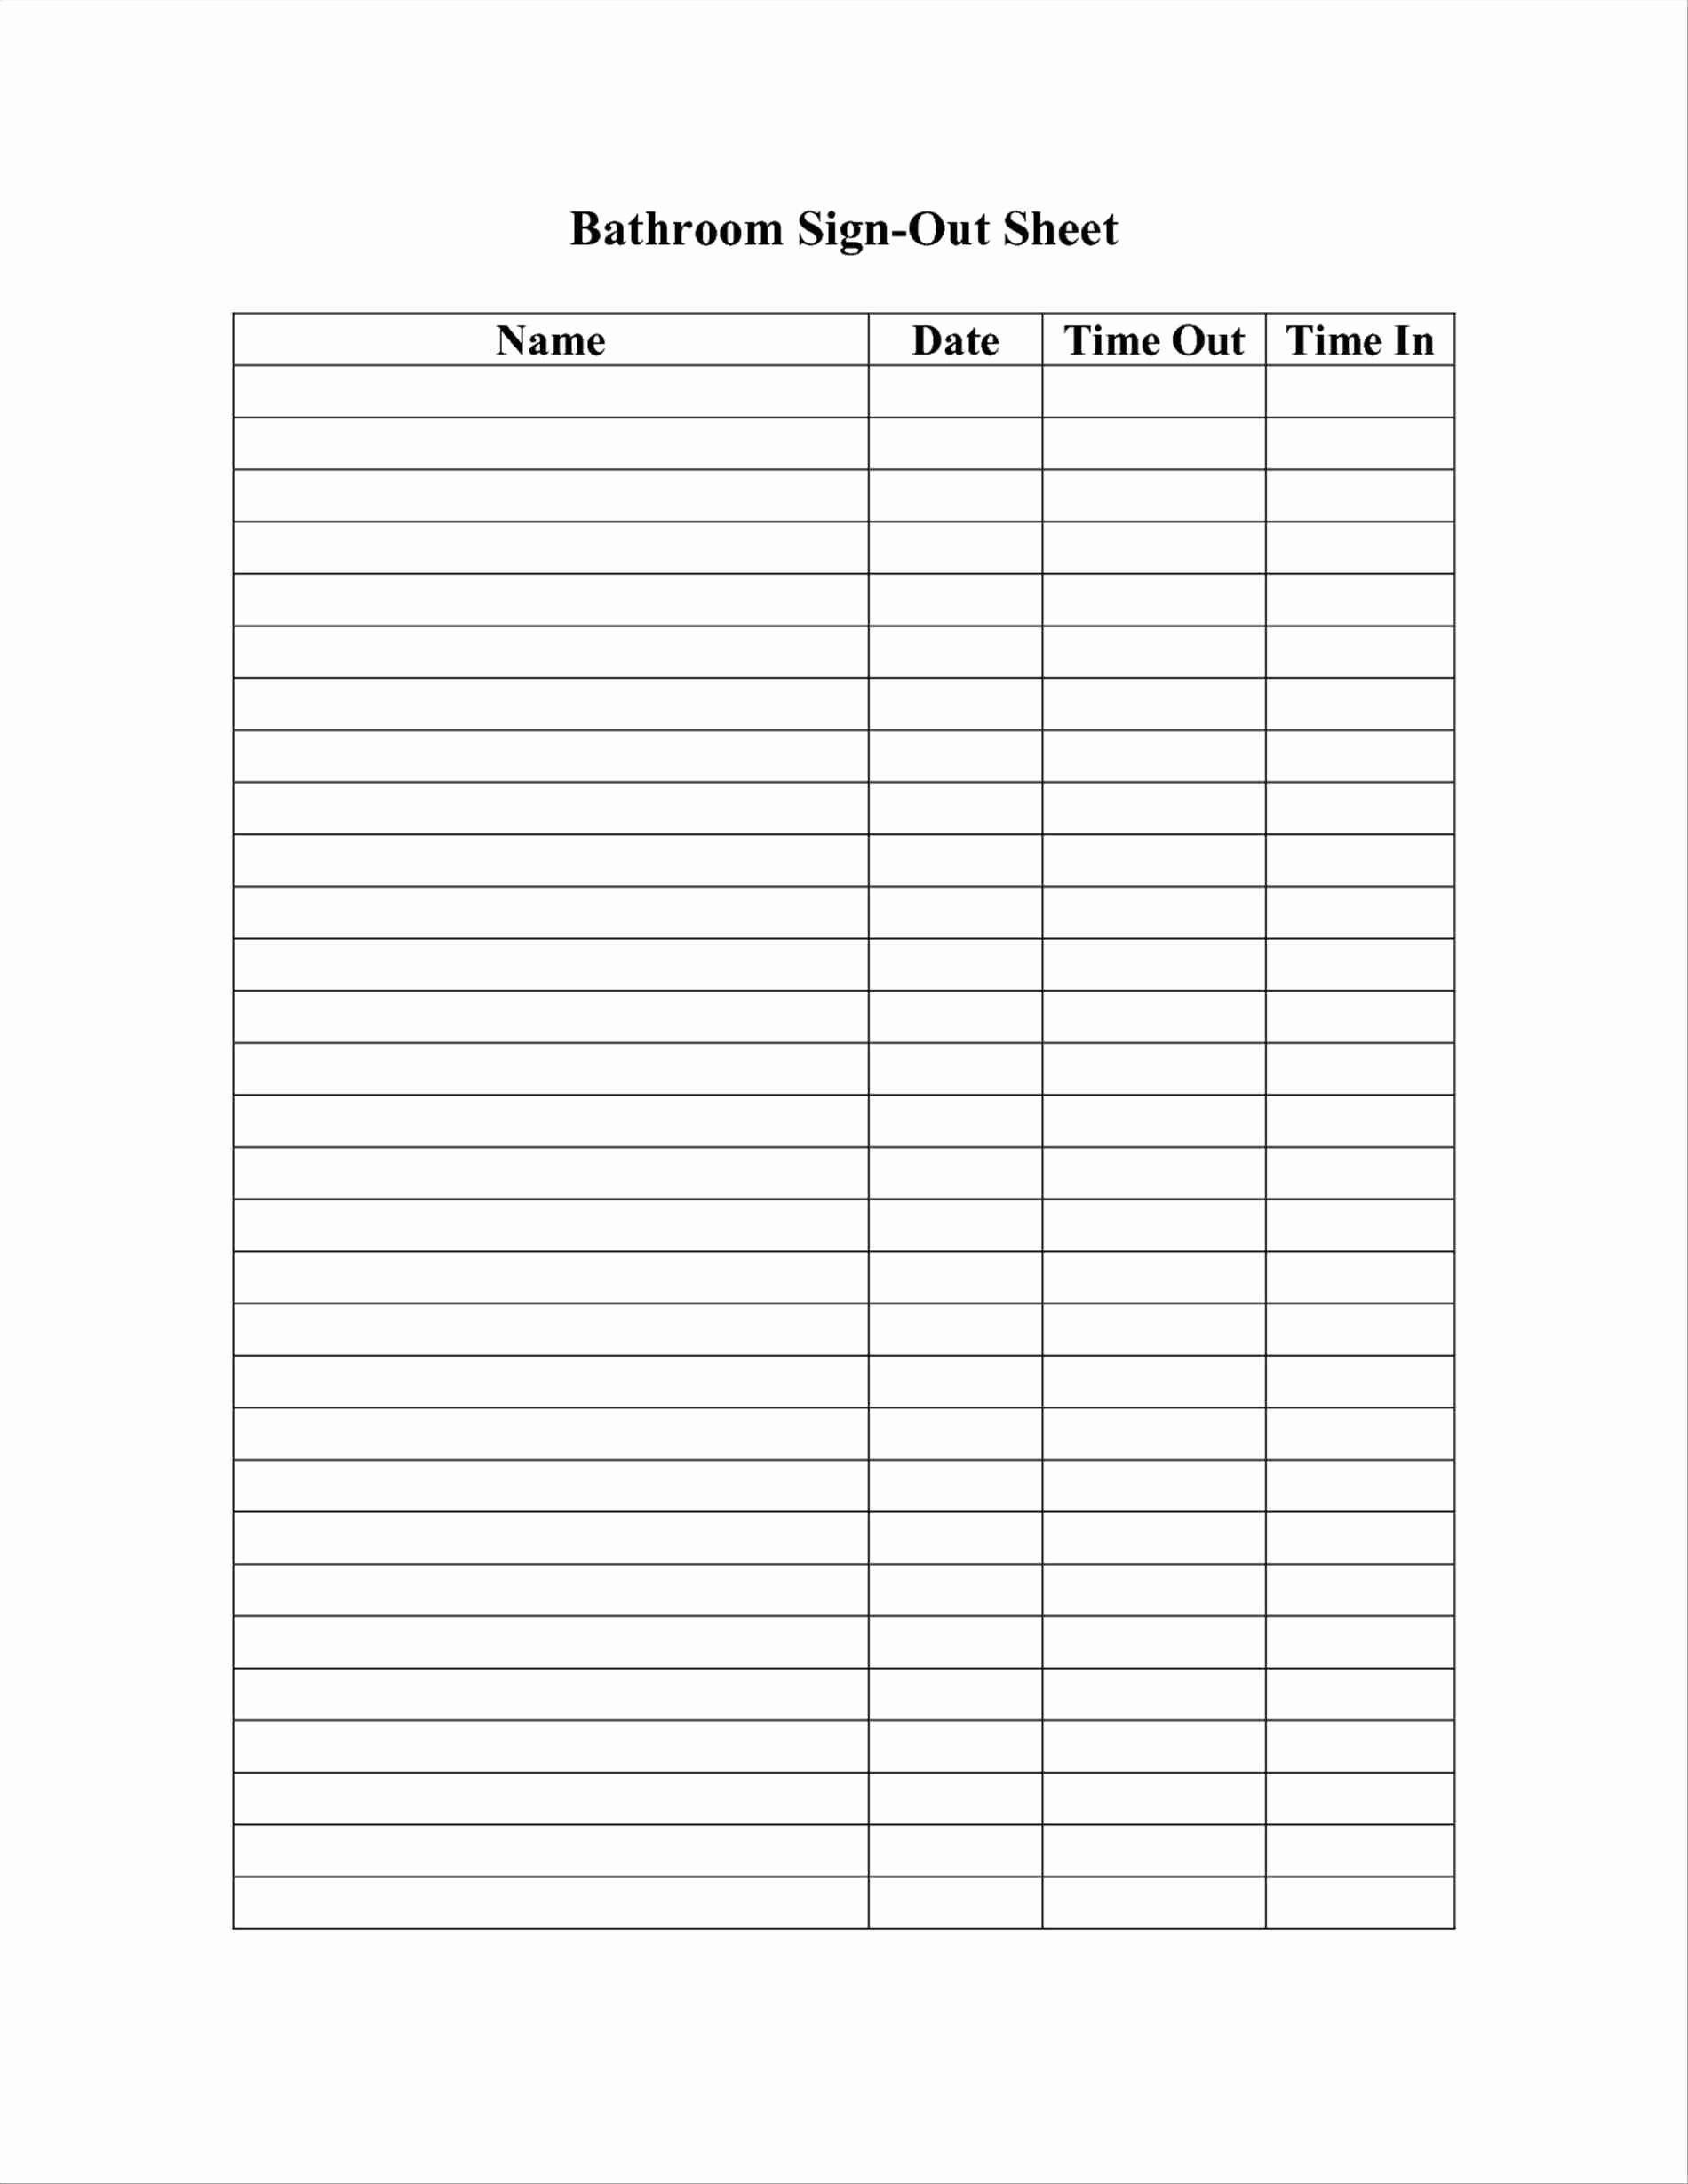 Sign Out Sheet Template Excel Lovely Sign Out Sheet Template Excel